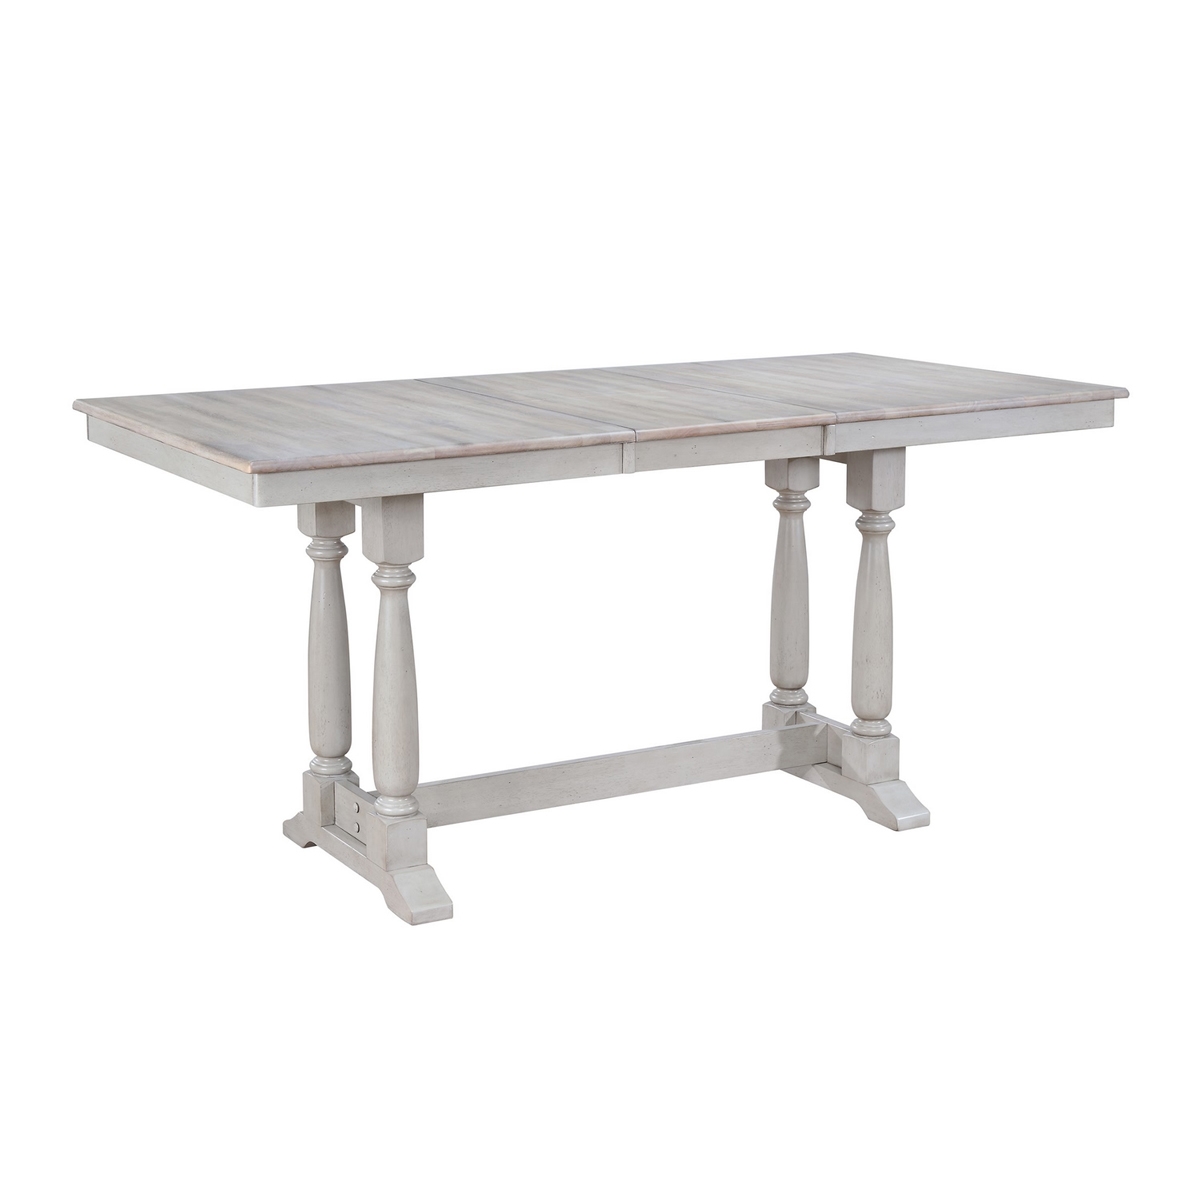 Picture of Ridgeway Tall Dining Table